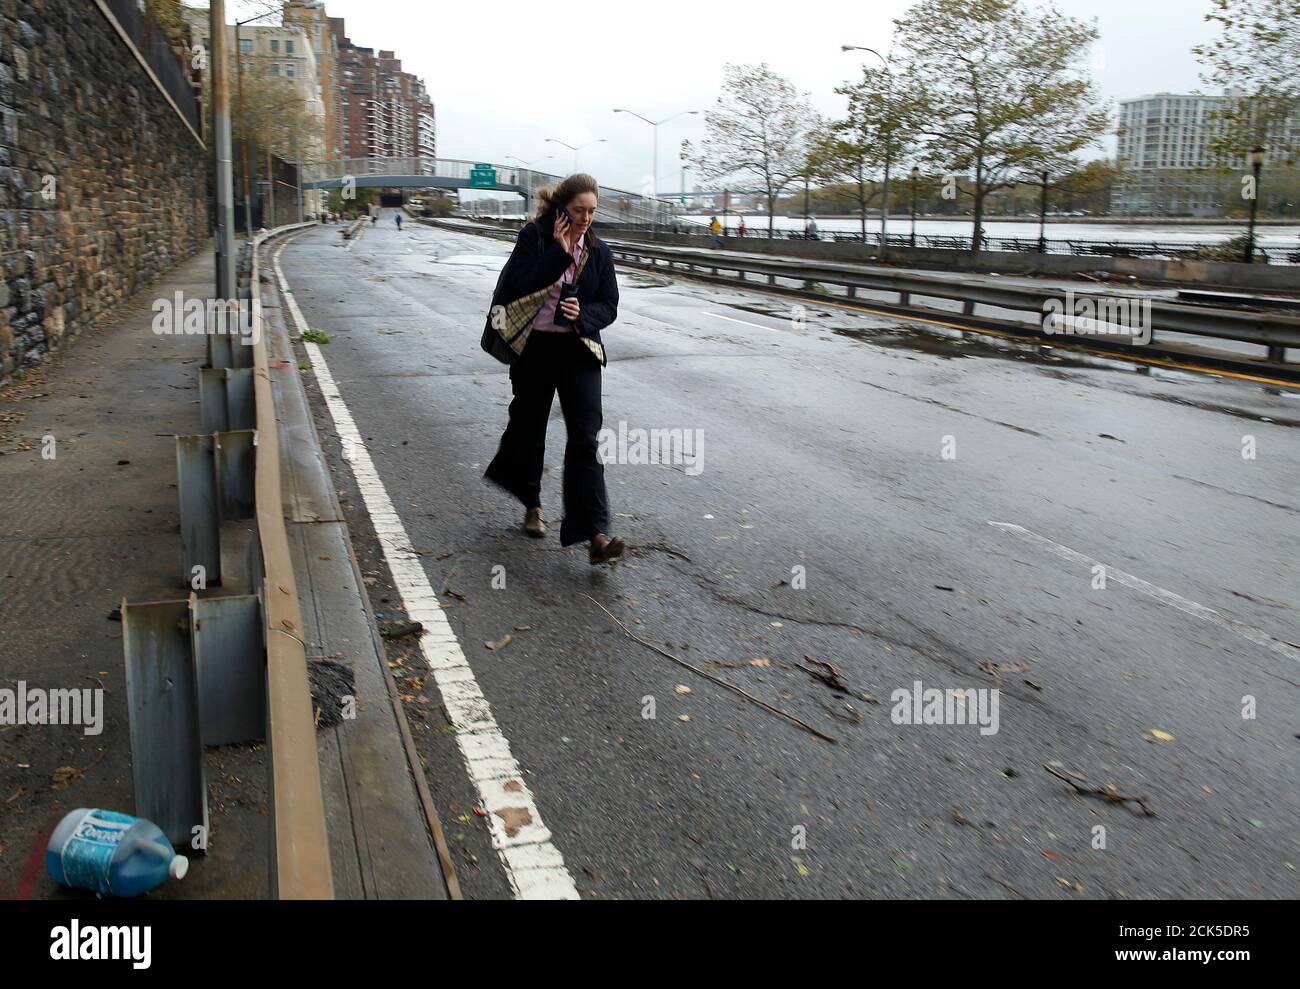 A woman walks along FDR Drive on the Upper East Side in the aftermath of Hurricane Sandy in New York October 30, 2012. Almost the entire length of the FDR was flooded.  REUTERS/Carlo Allegri  (UNITED STATES - Tags: ENVIRONMENT DISASTER) Stock Photo